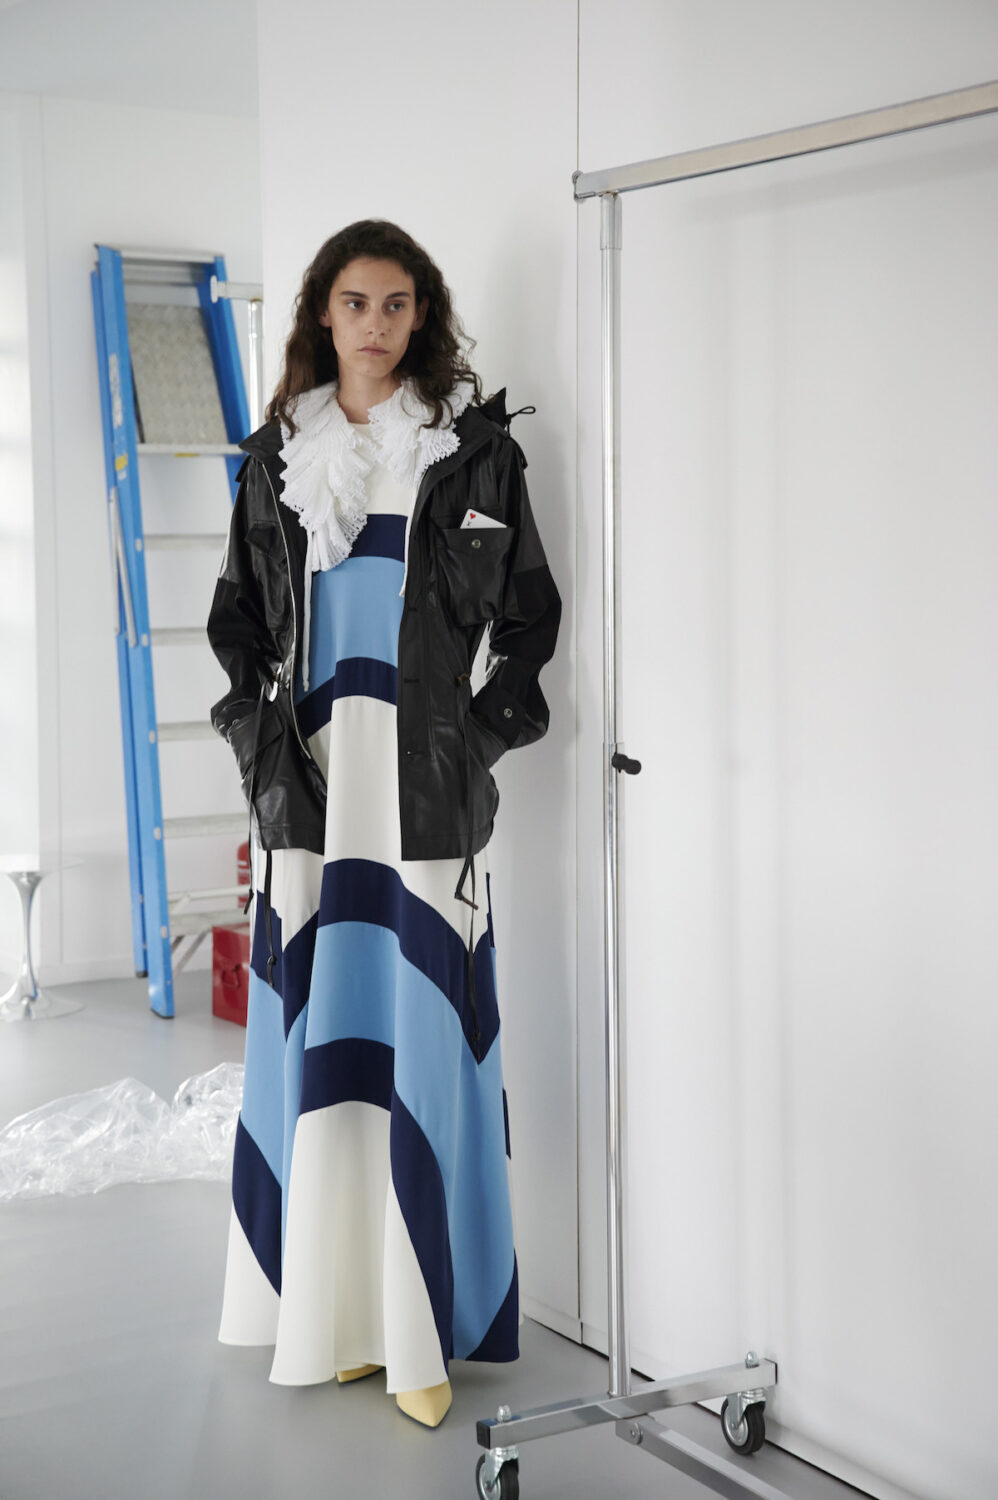 Louis Vuitton unveils “Game On”, a contemplative and playful 2021 Cruise  Collection - LVMH